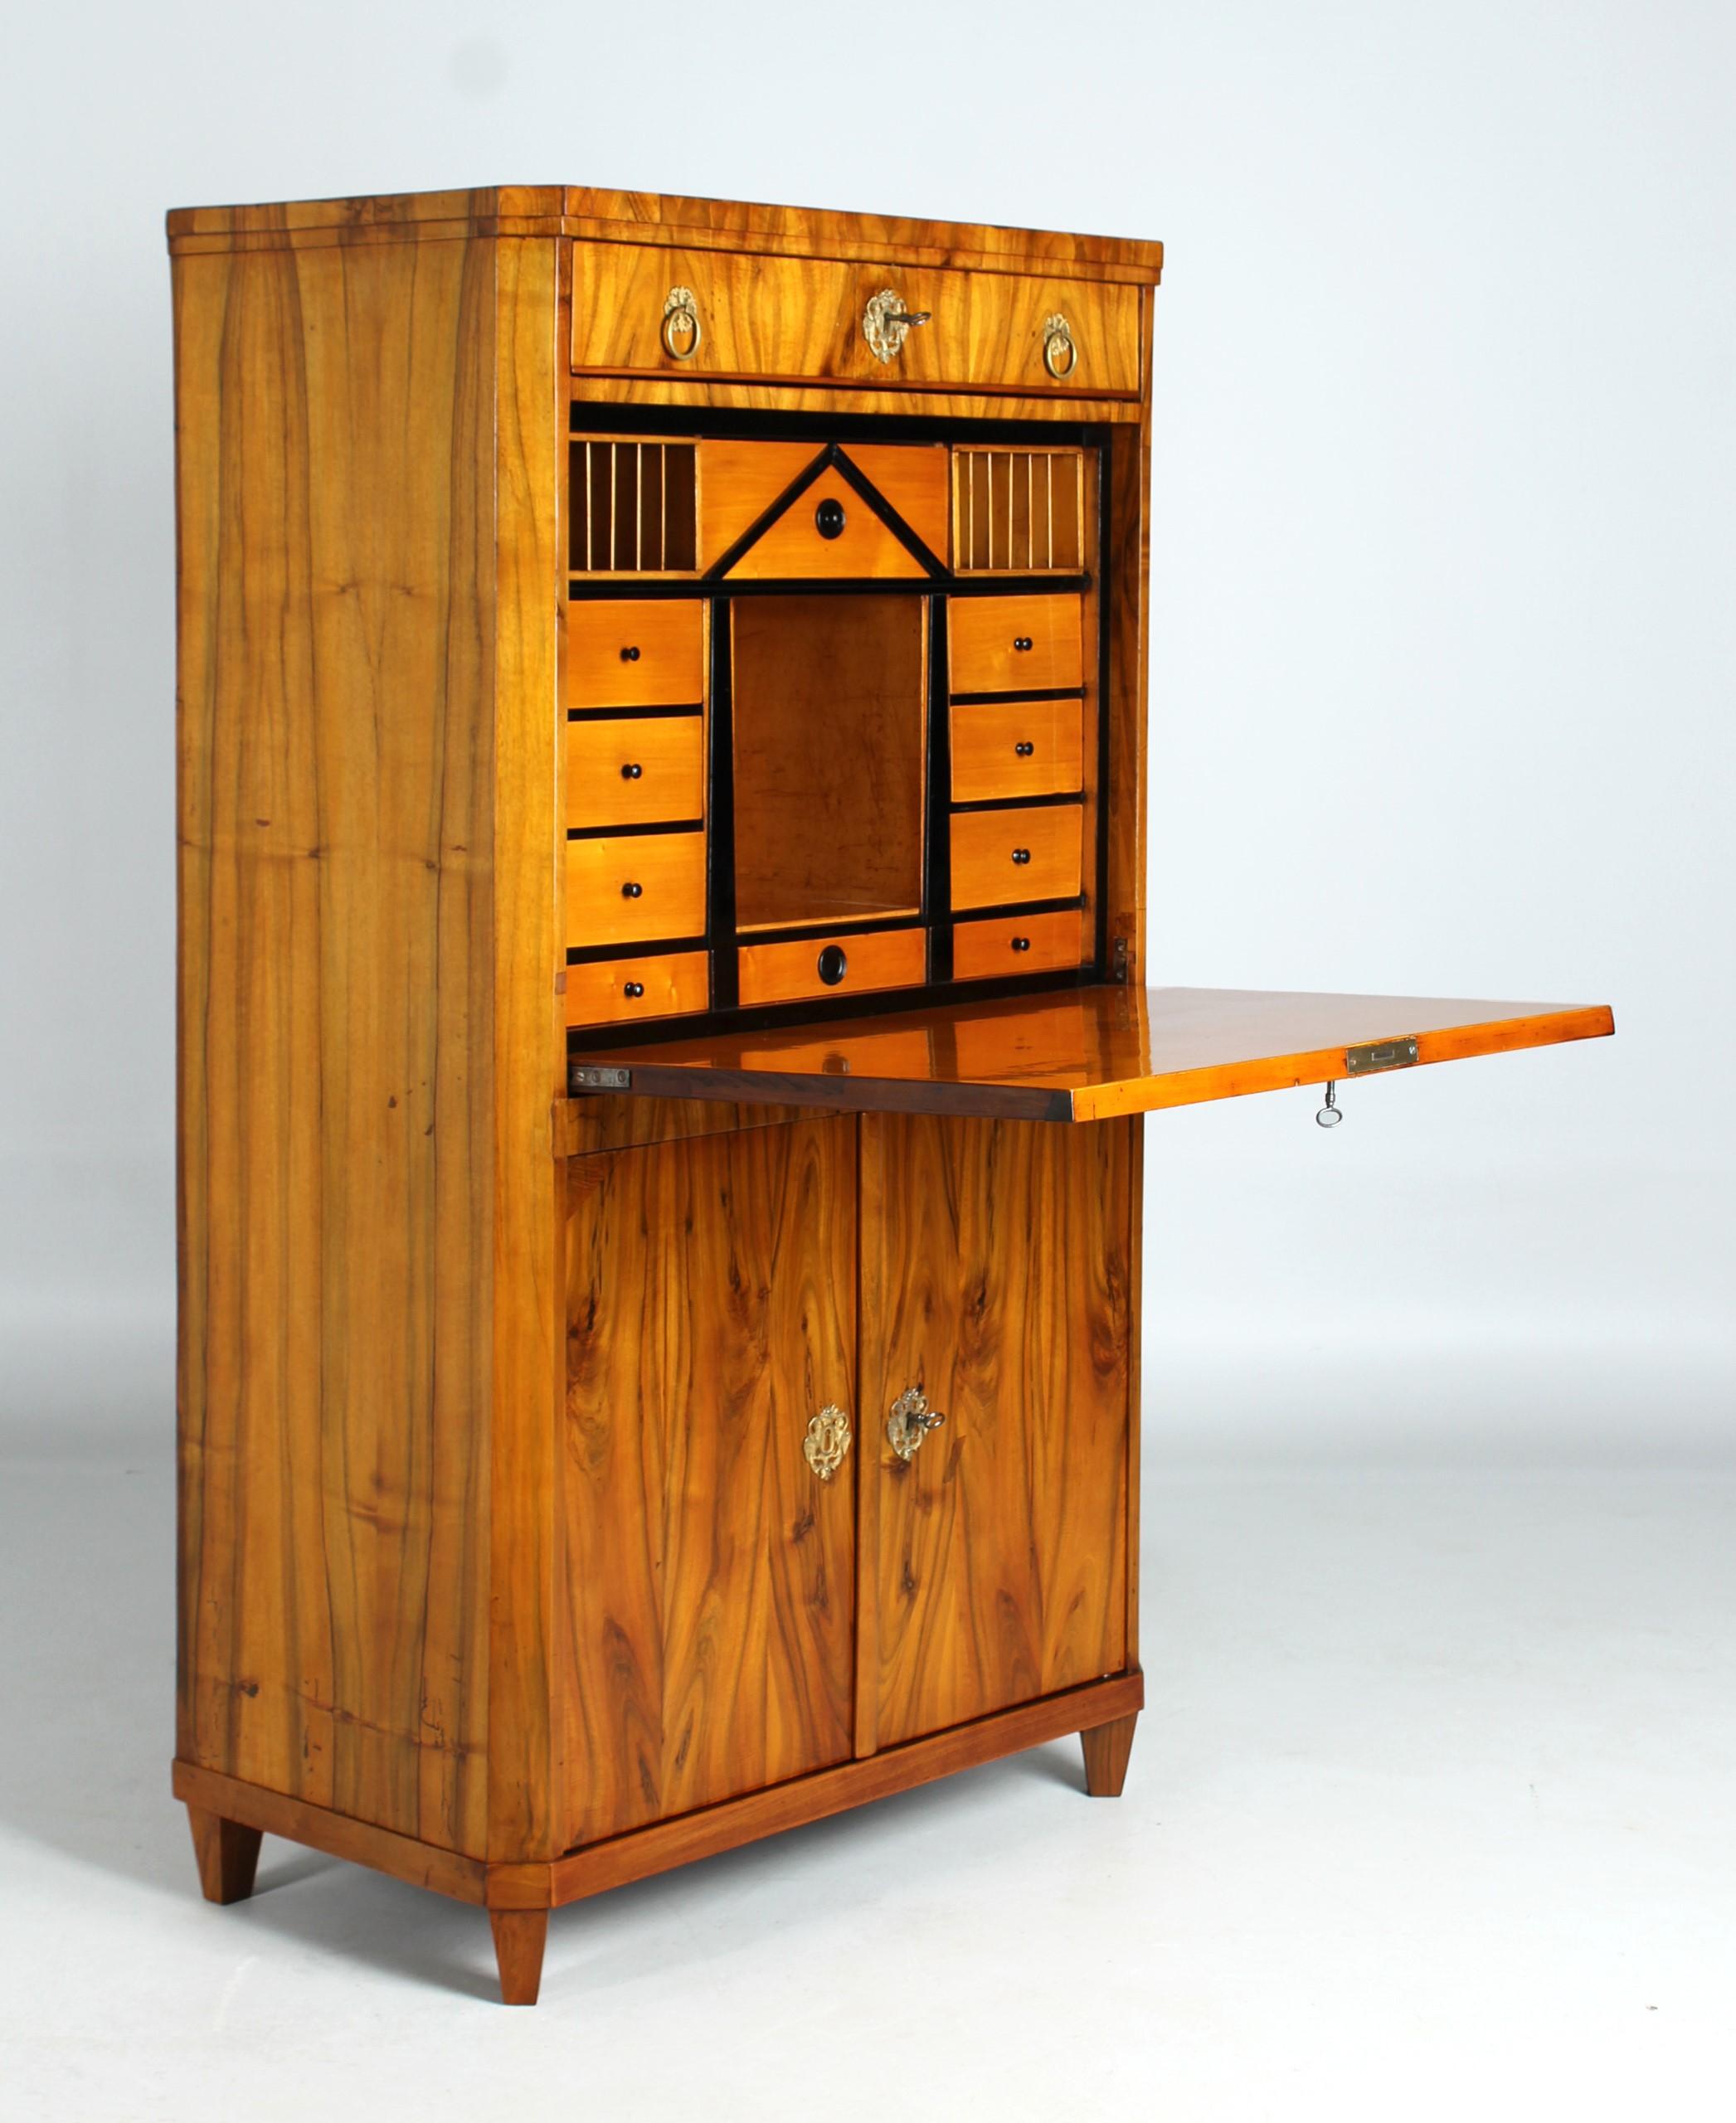 Small antique Biedermeier secretary

Austria
Walnut
Biedermeier around 1820

Dimensions: H x W x D: 146 x 84 x 45 cm

Description:
Piece of furniture standing on pointed feet set over the corner with doors at the bottom, the writing flap above and a